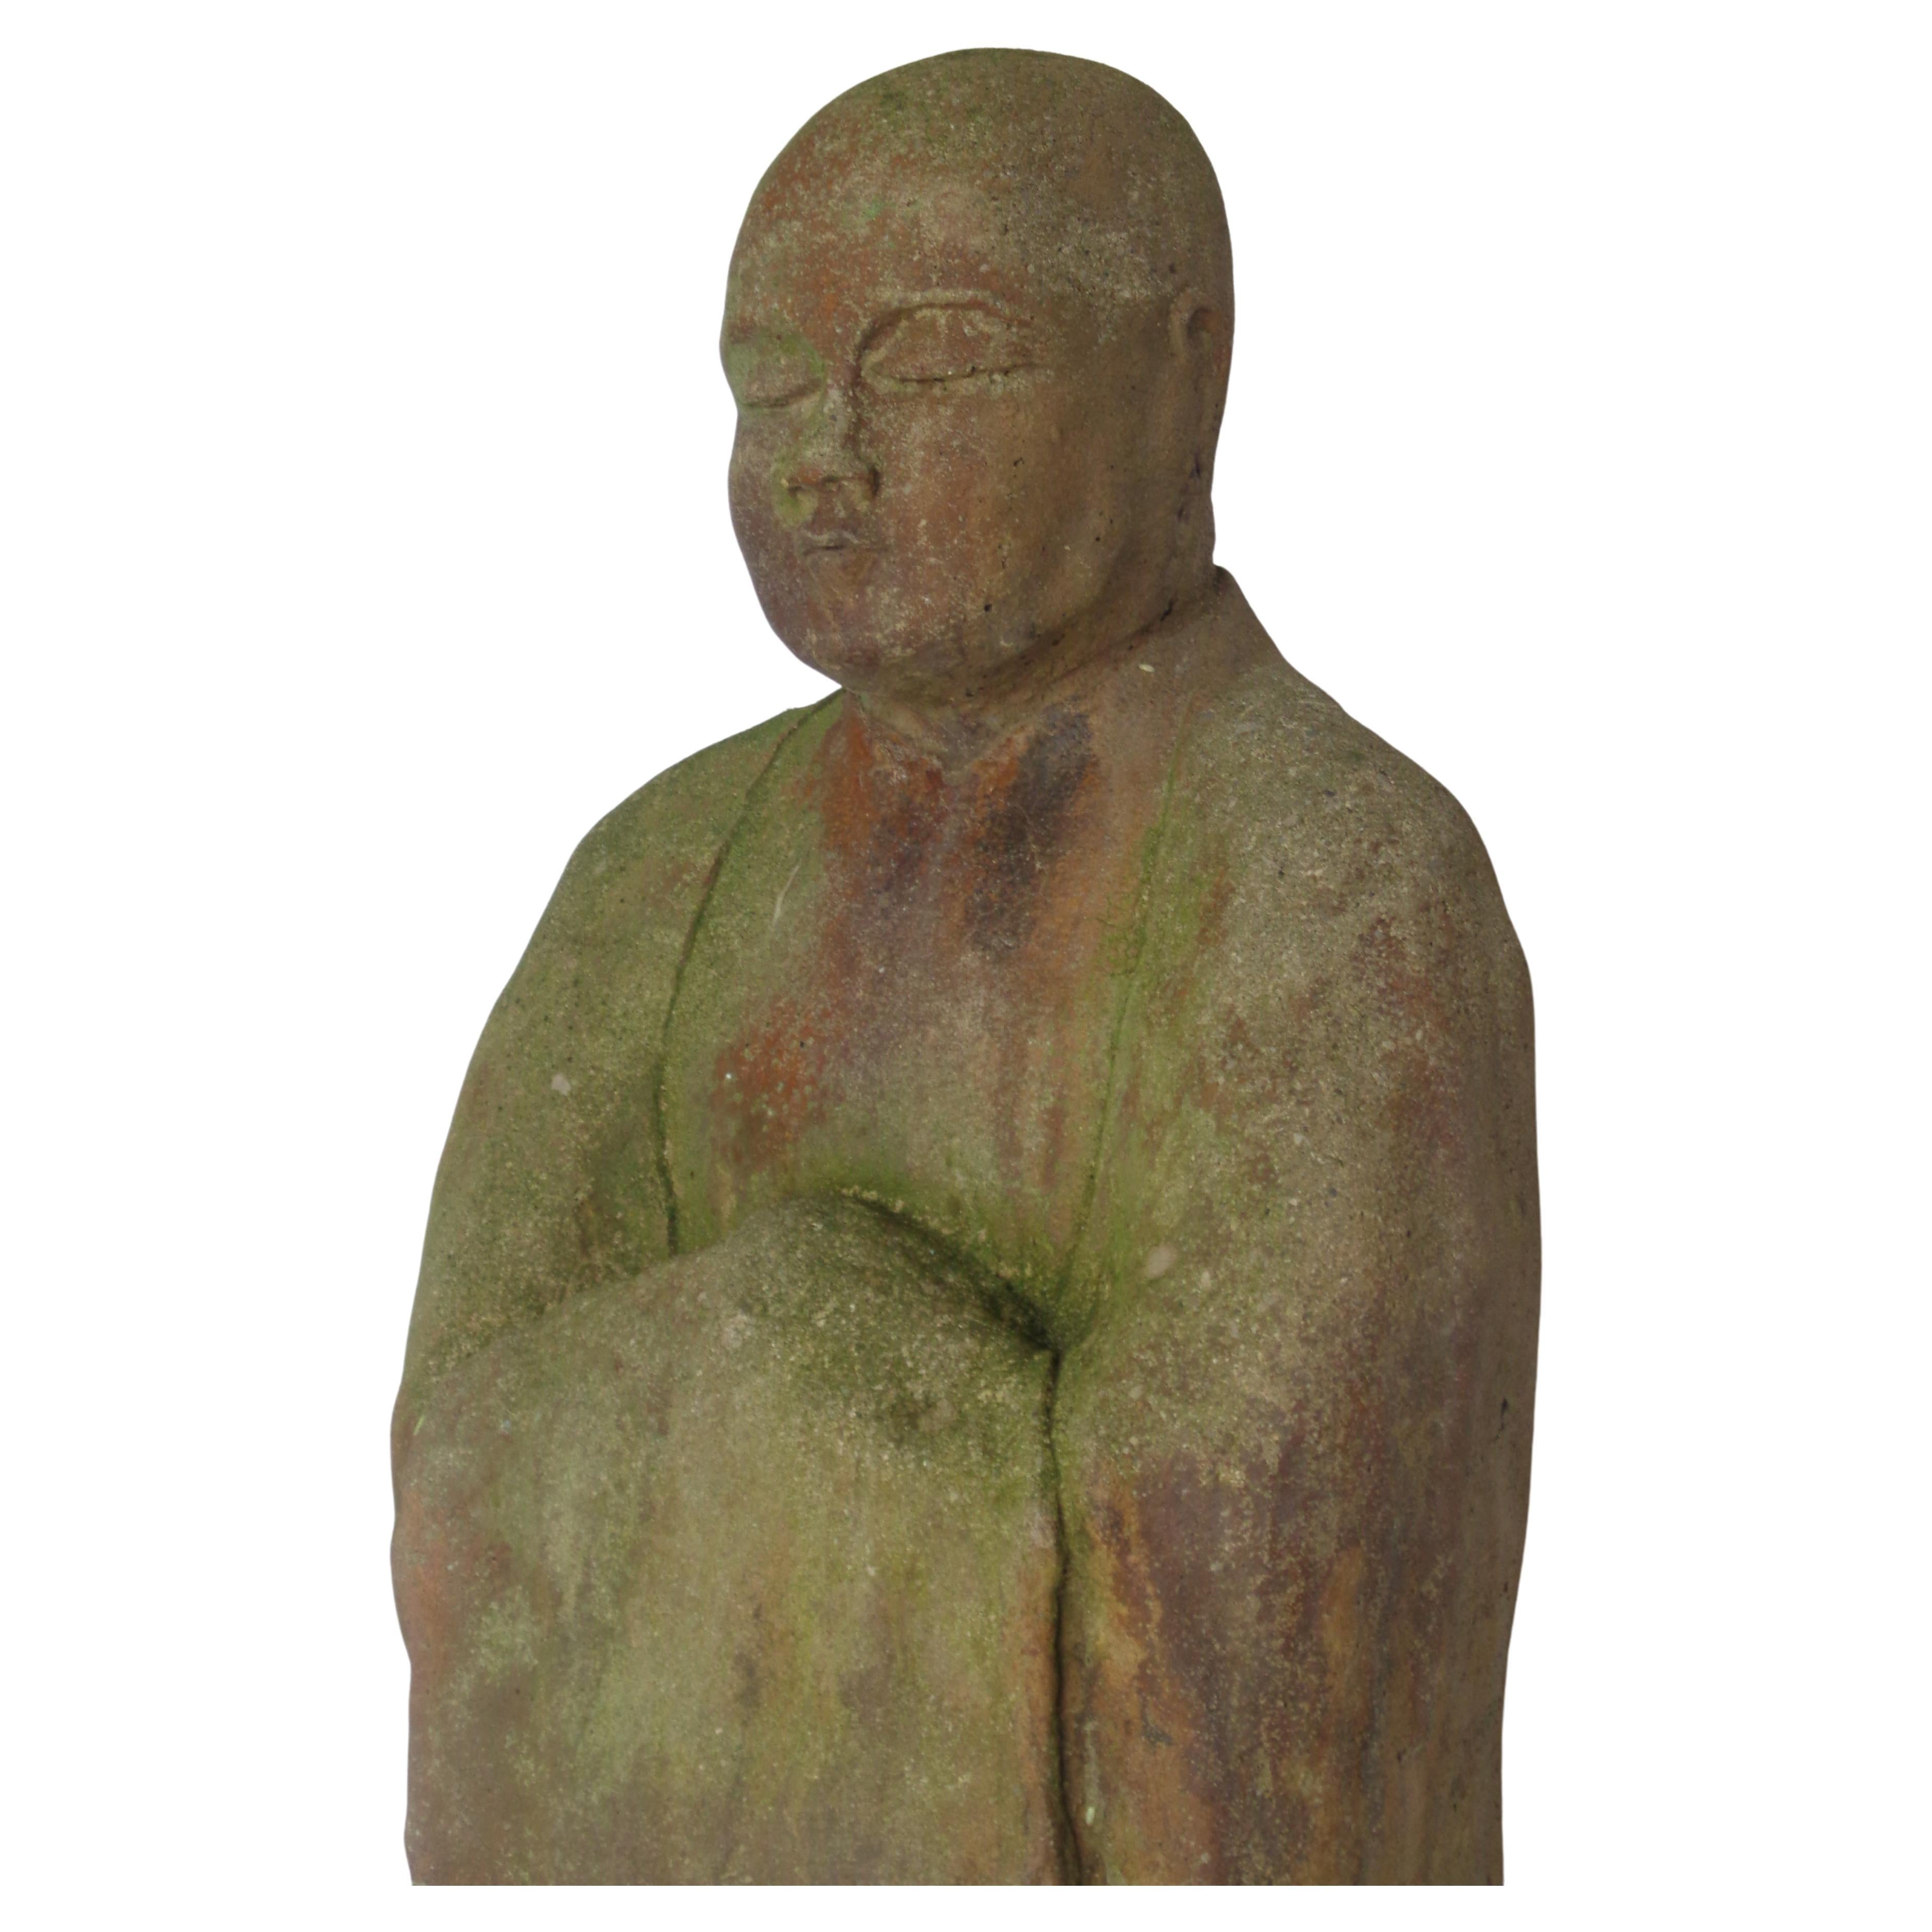 Large and heavy terracotta like carved stone statue of a standing Japanese Jizo Bodhisattva in the Kamakura period style with beautifully aged old color w/ areas of rust and algae greening from being exposed to the elements for many decades at a